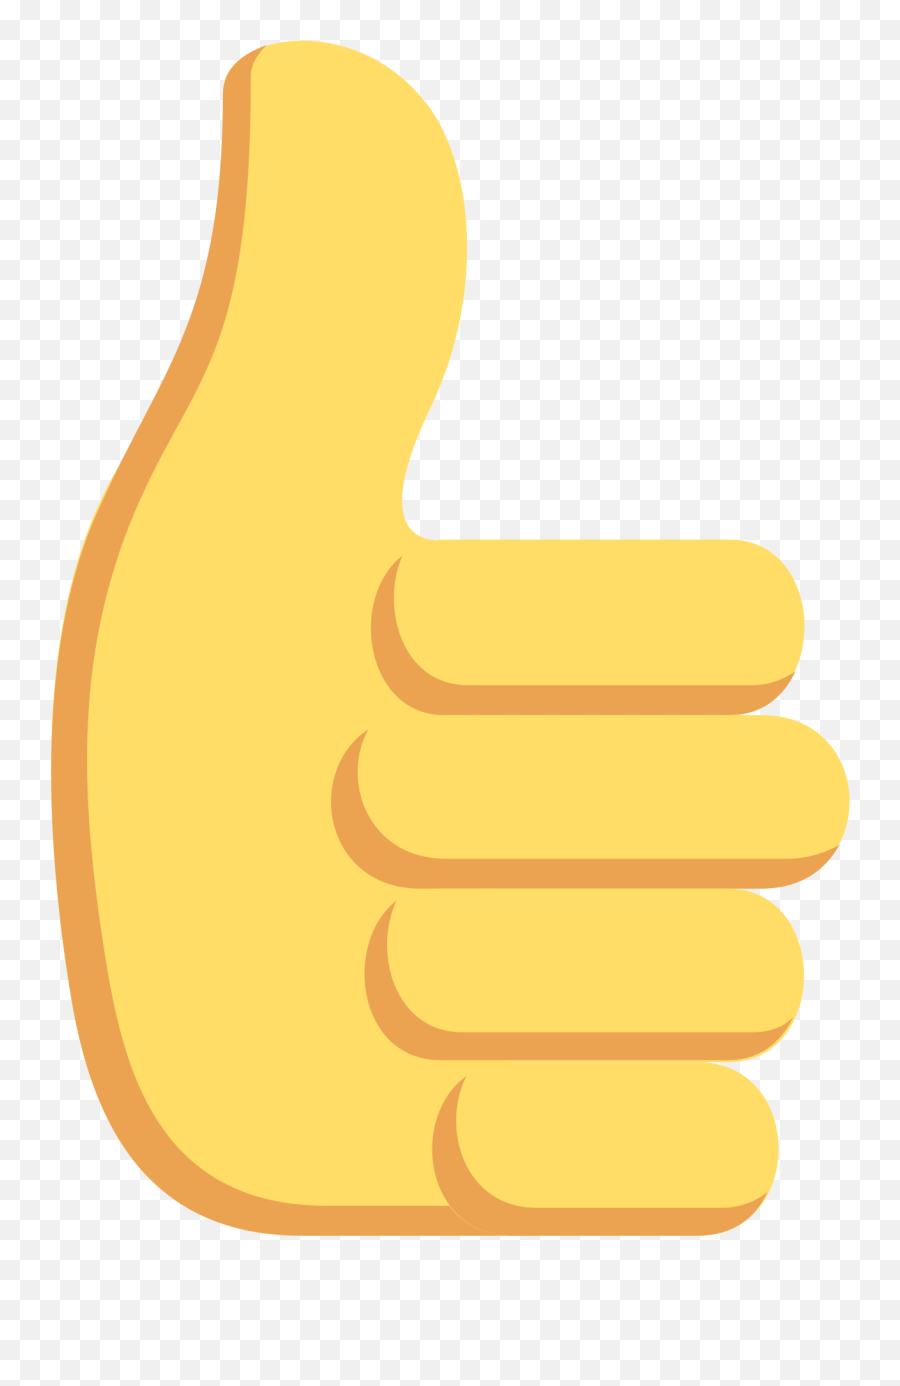 Thumbs Up Sign Emoji Emoticon Vector Icon Ai Eps Svg Png